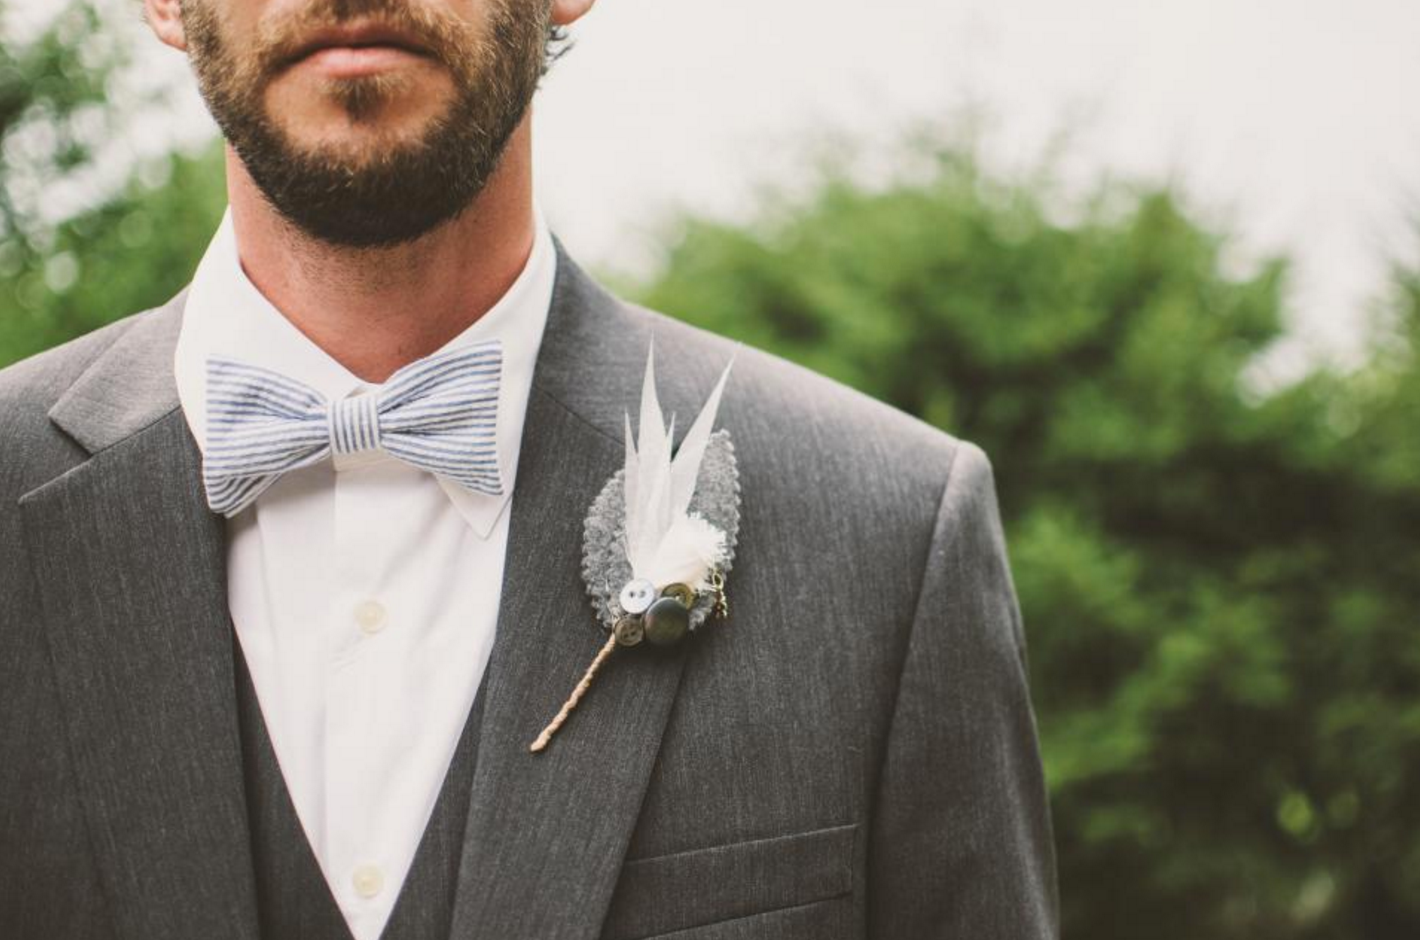 how to match your wedding date, wedding suit, wedding accessories, bow tie, tie, pocket square, lapel flower, summer suit, matching your date, should we match, outfit coordinating, men's summer style